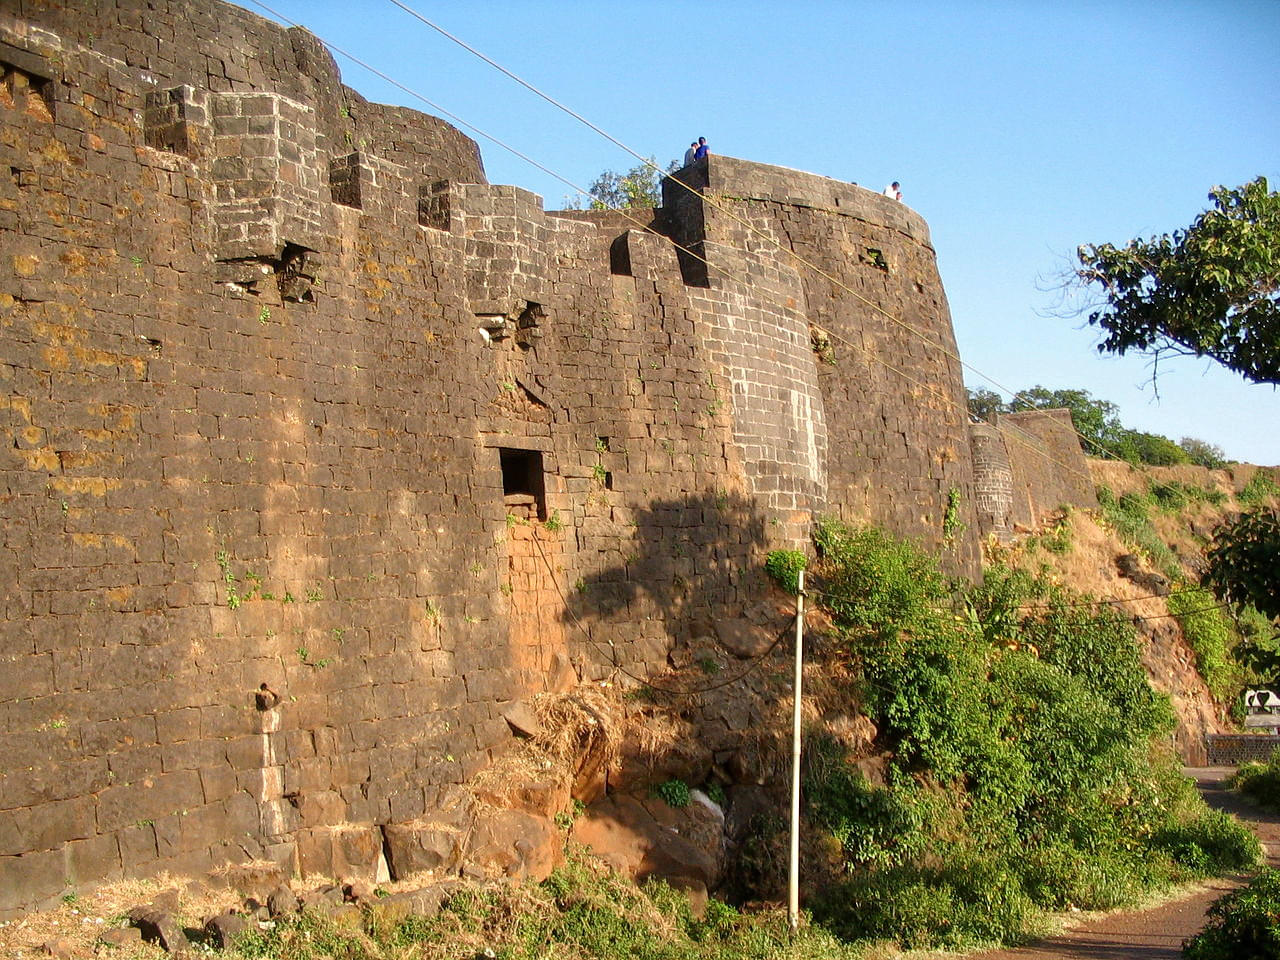  Panhala Fort Overview